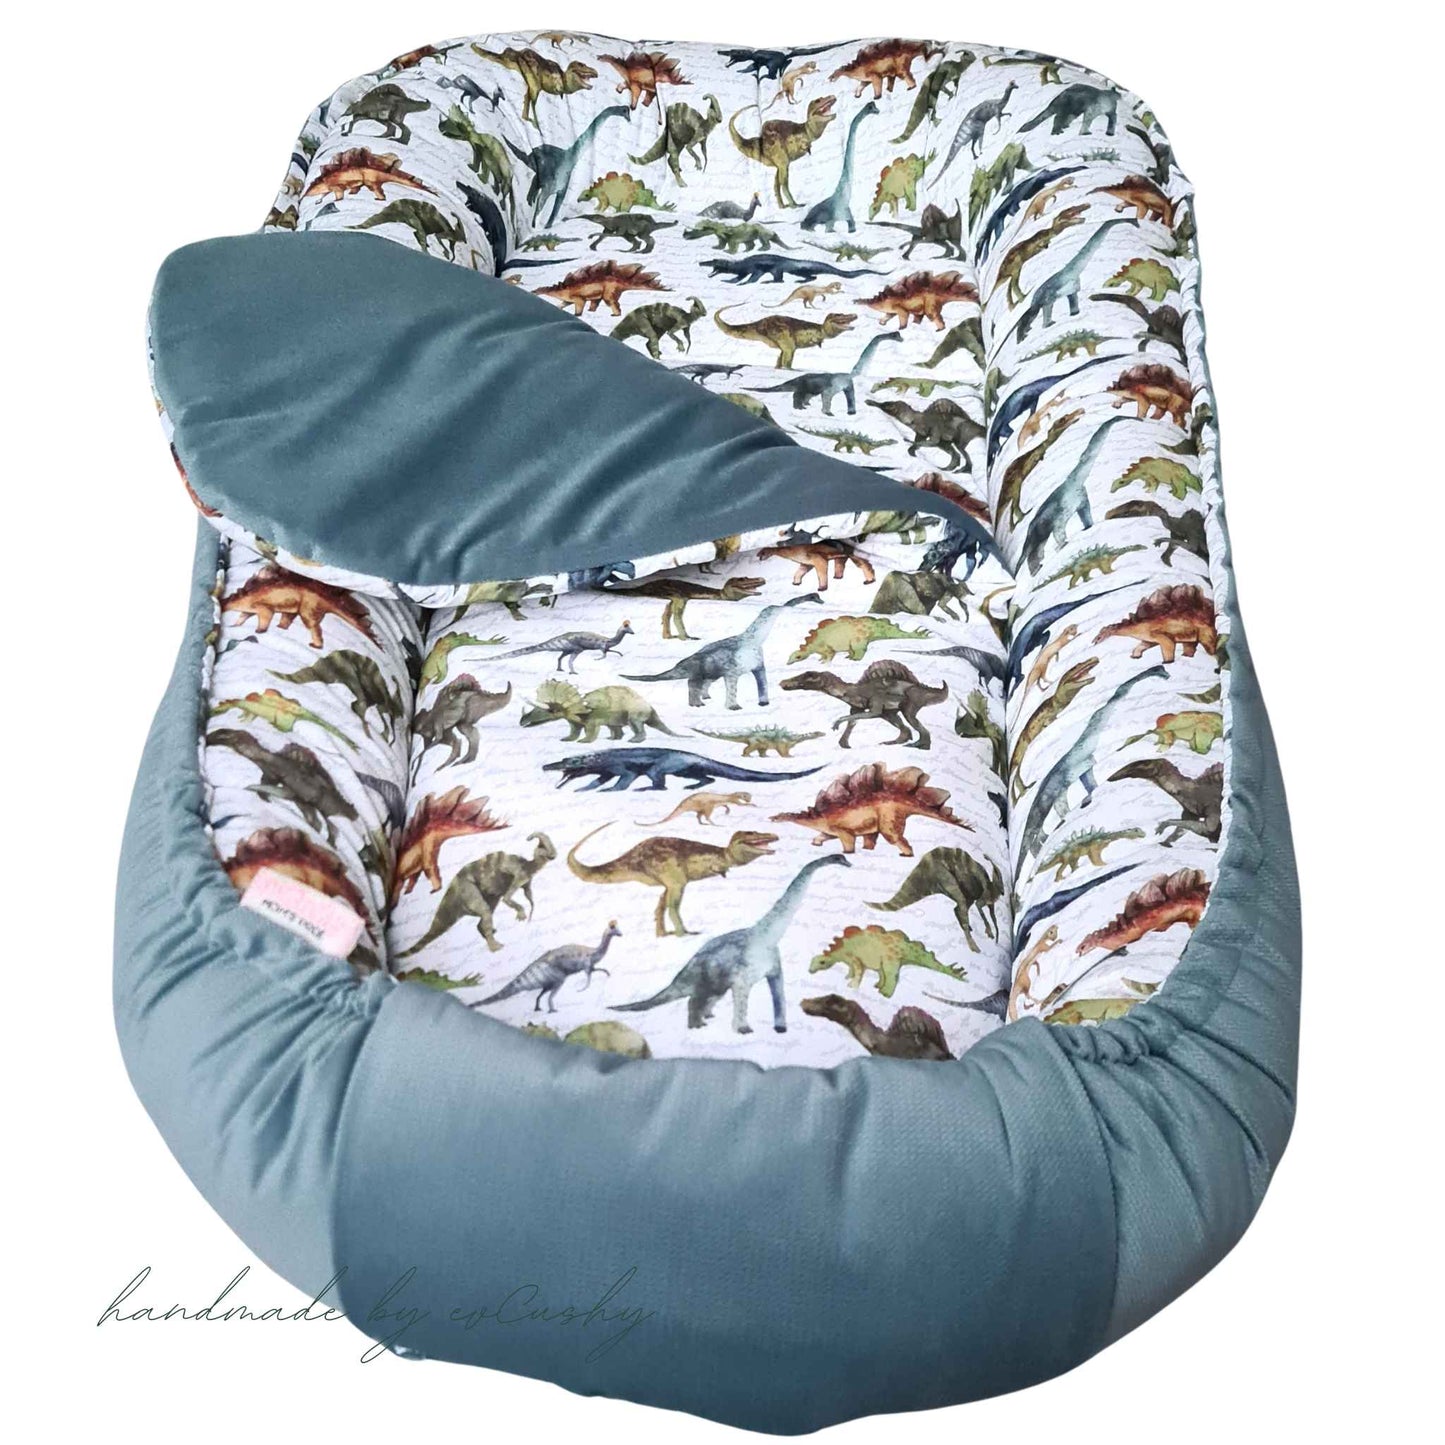 nest xxl grand sleep pod for toddler green with dinosaurs pattern